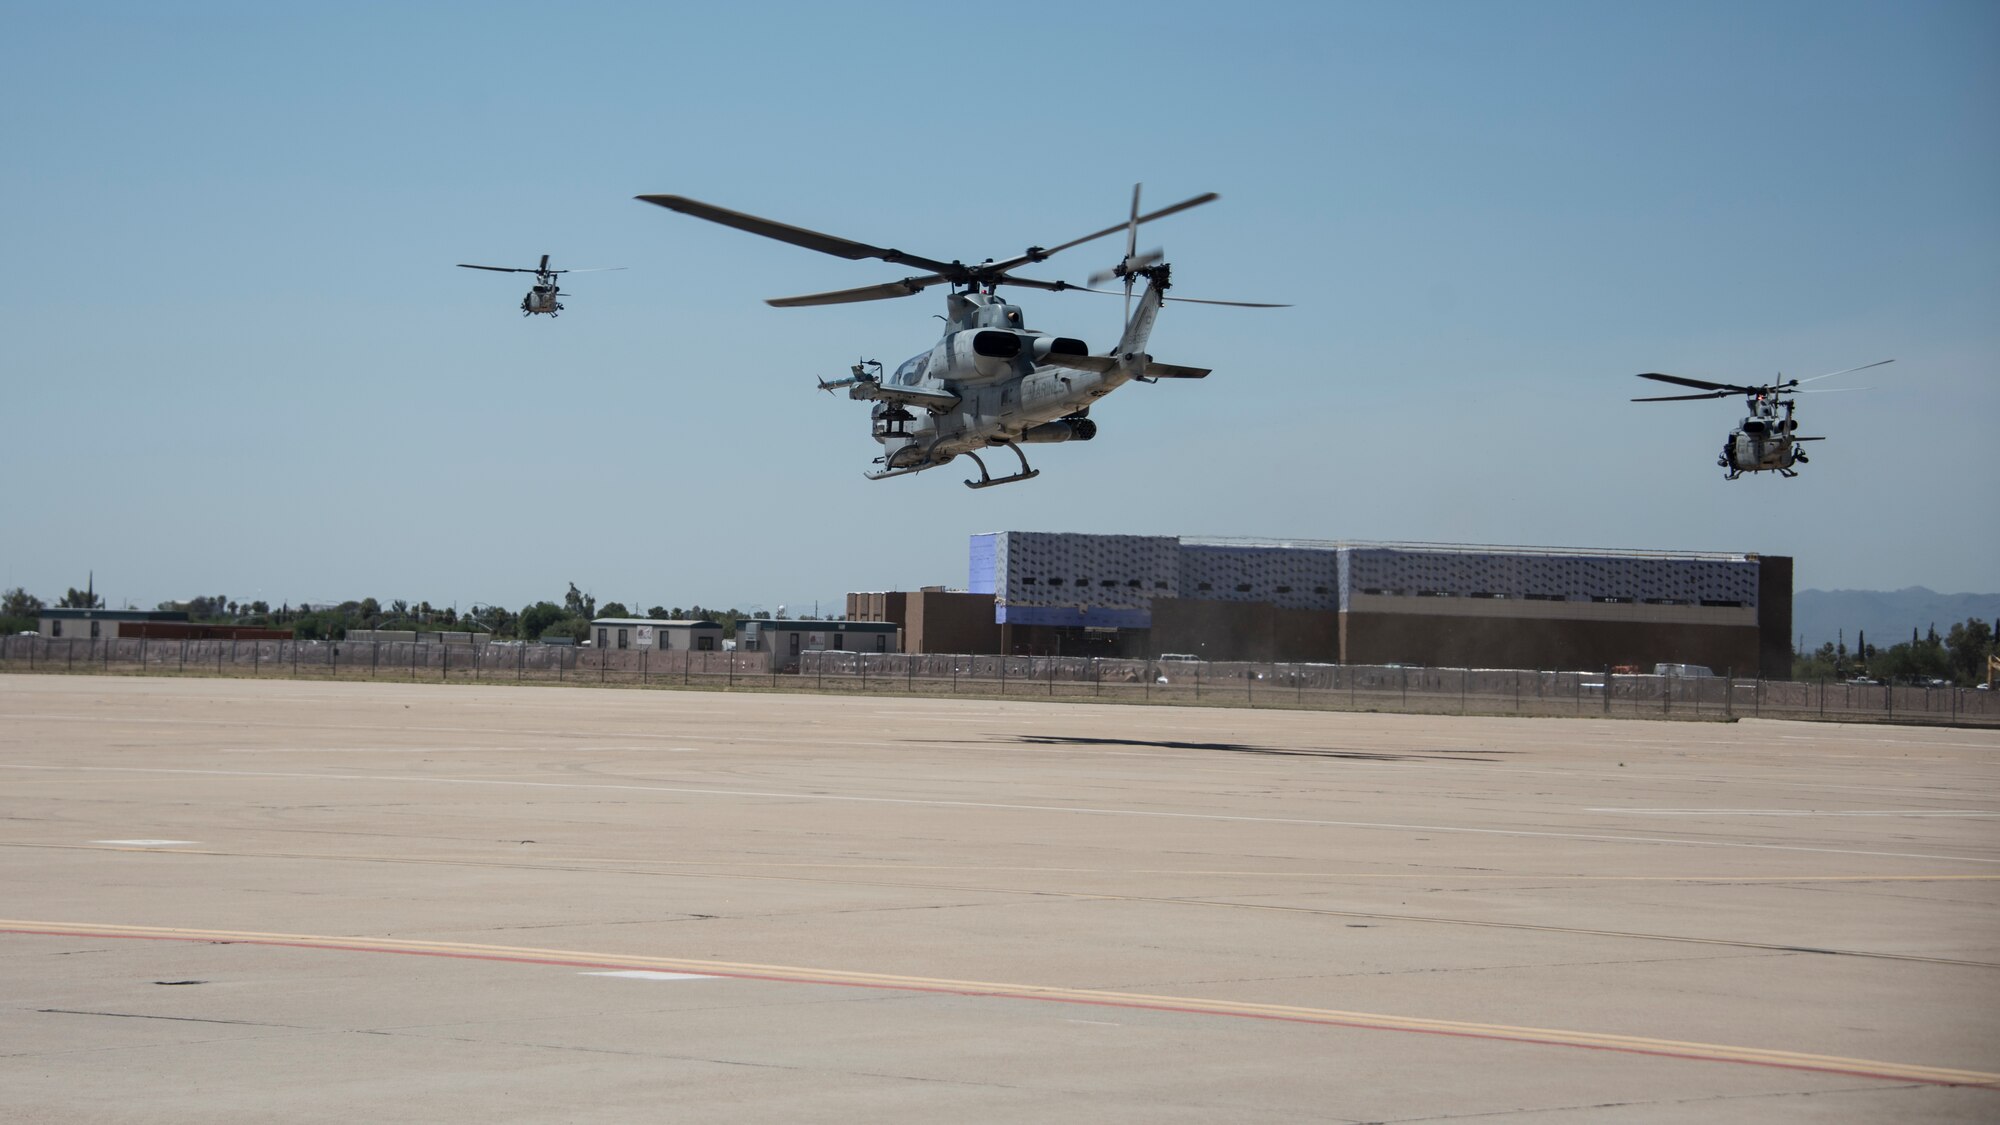 A photo of Marine helicopters taking off